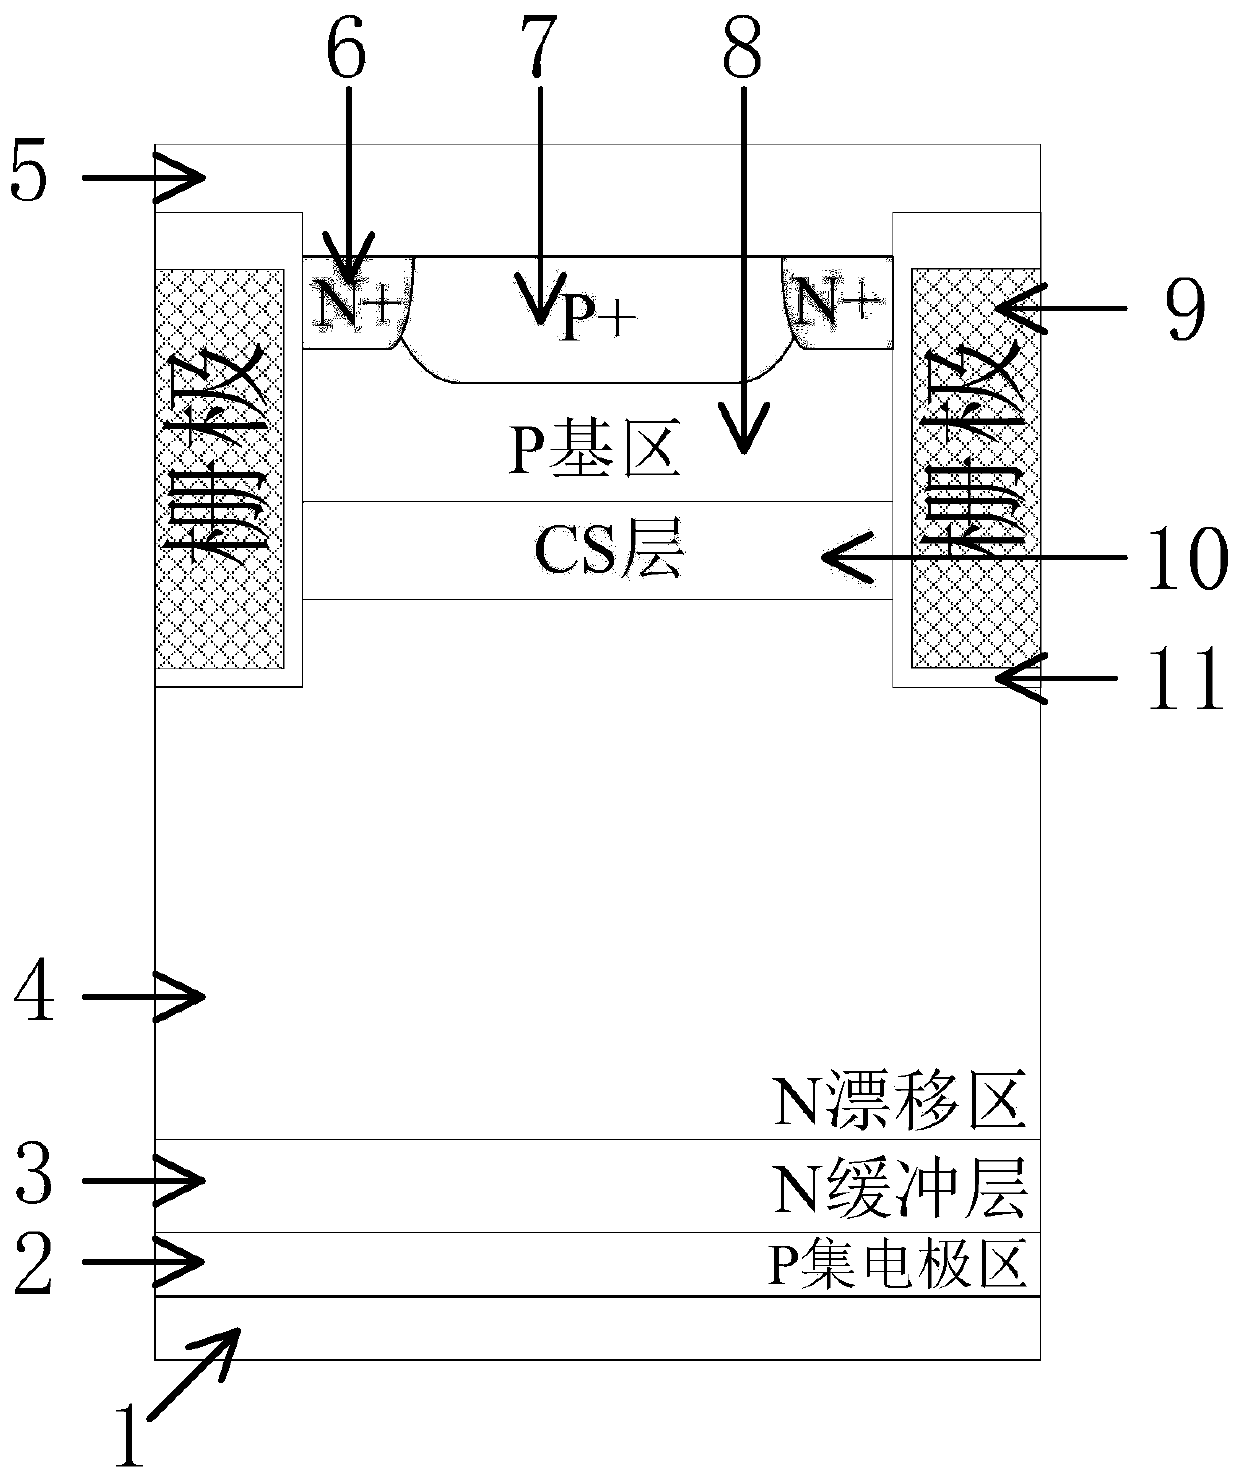 Groove-gate bipolar transistor with low EMI noise